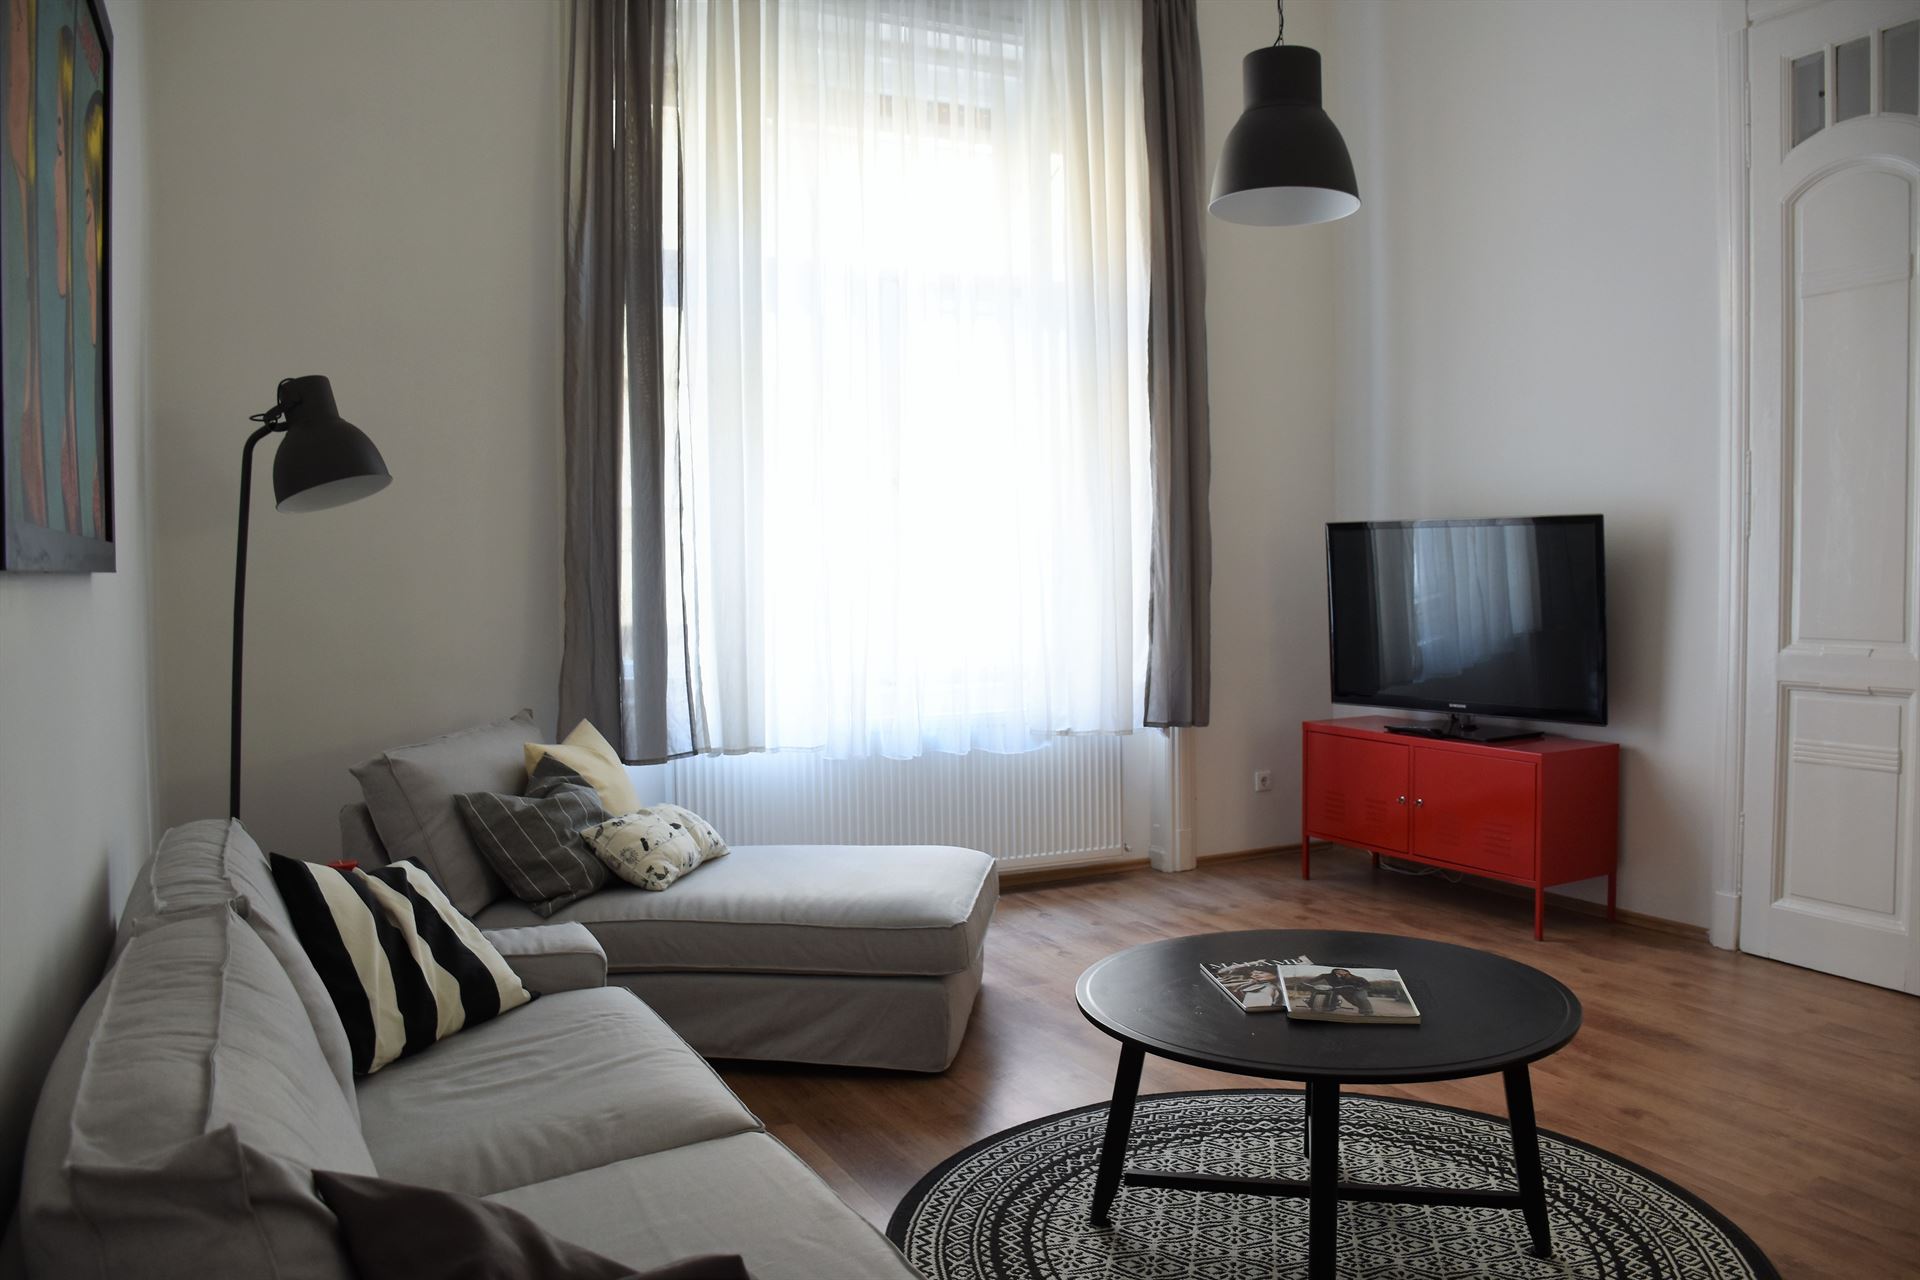 budapest-long-term-rental-apartment-flat-downtown-budapest-apartment-for-rent-district-619